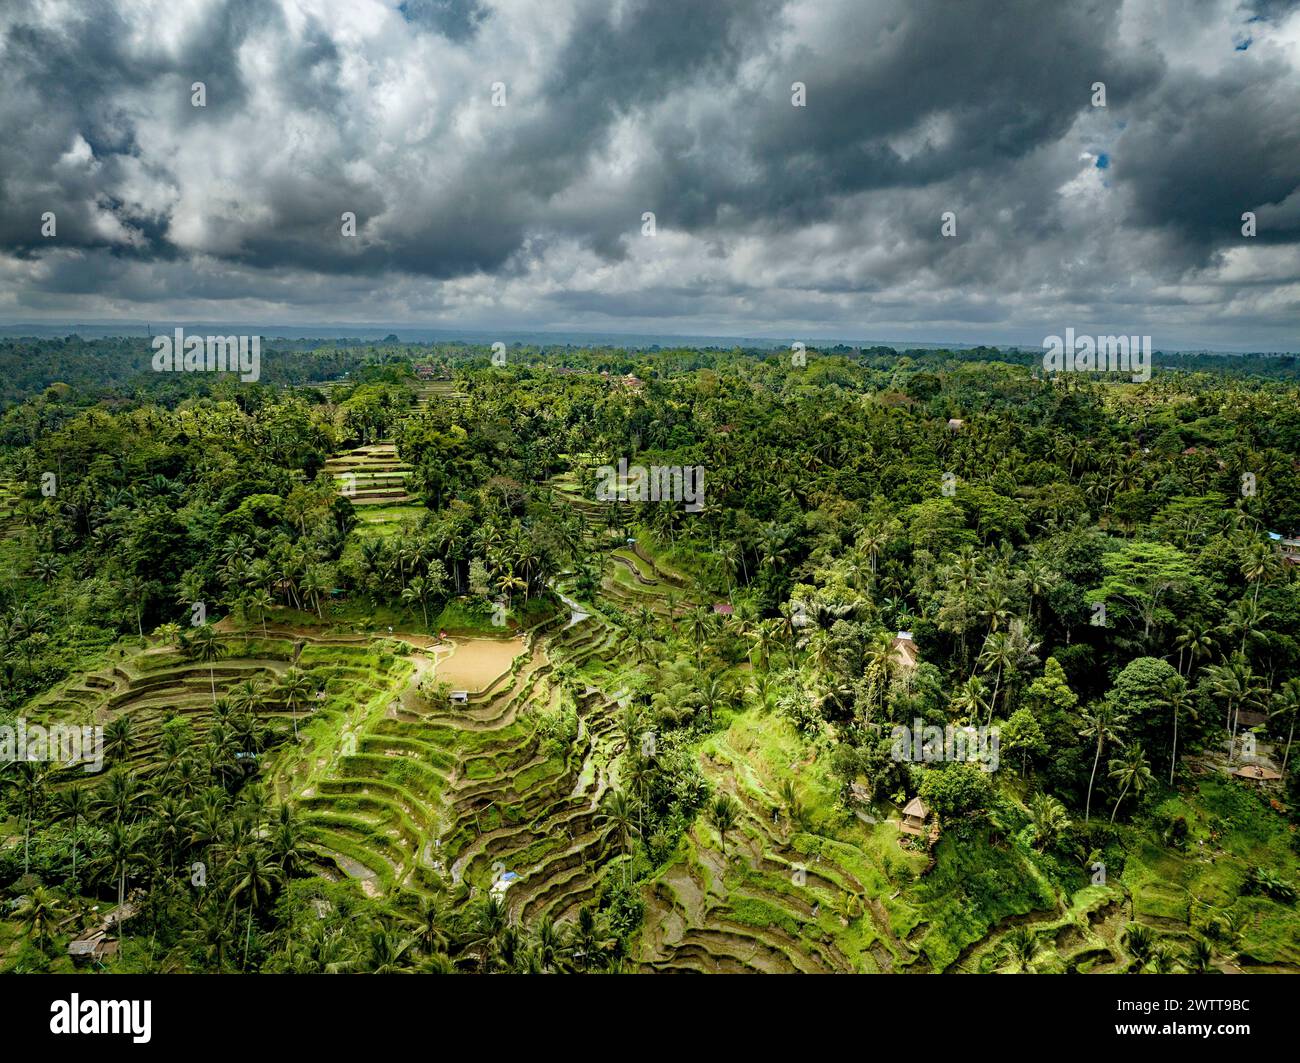 Aerial view of lush green rice terraces under a dramatic cloudy sky Stock Photo